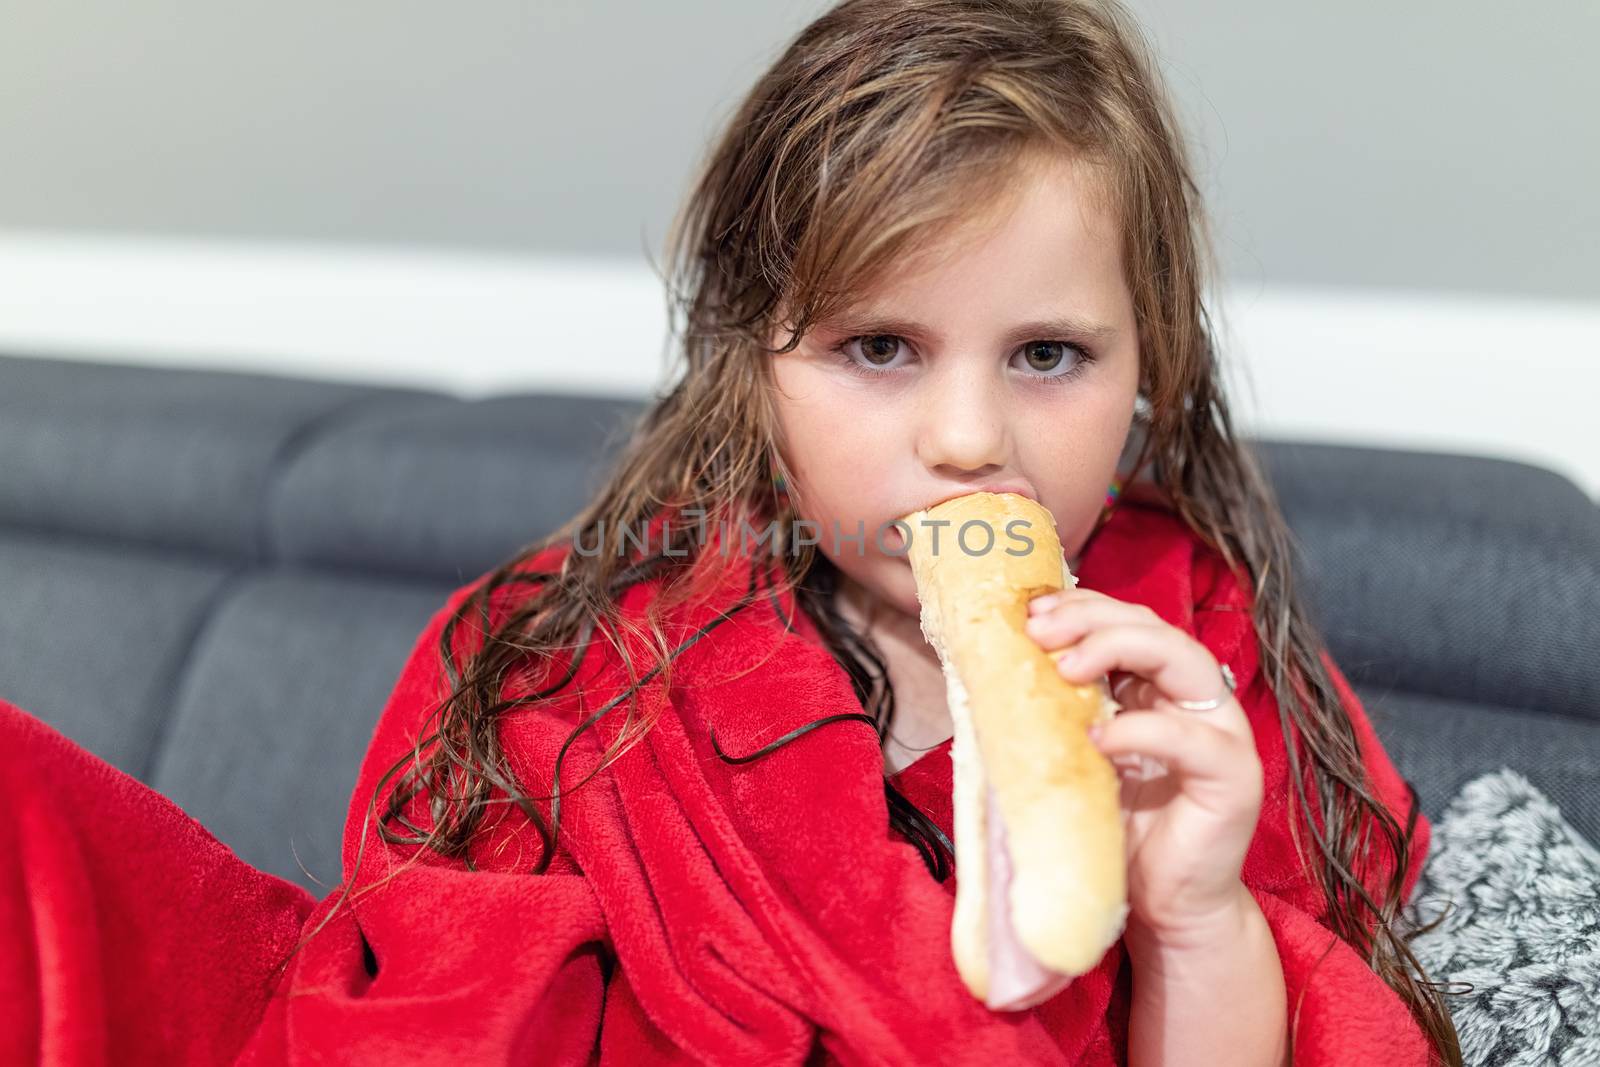 Closeup portrait of cute little girl with curly golden hair after bath dinner pastry with salami